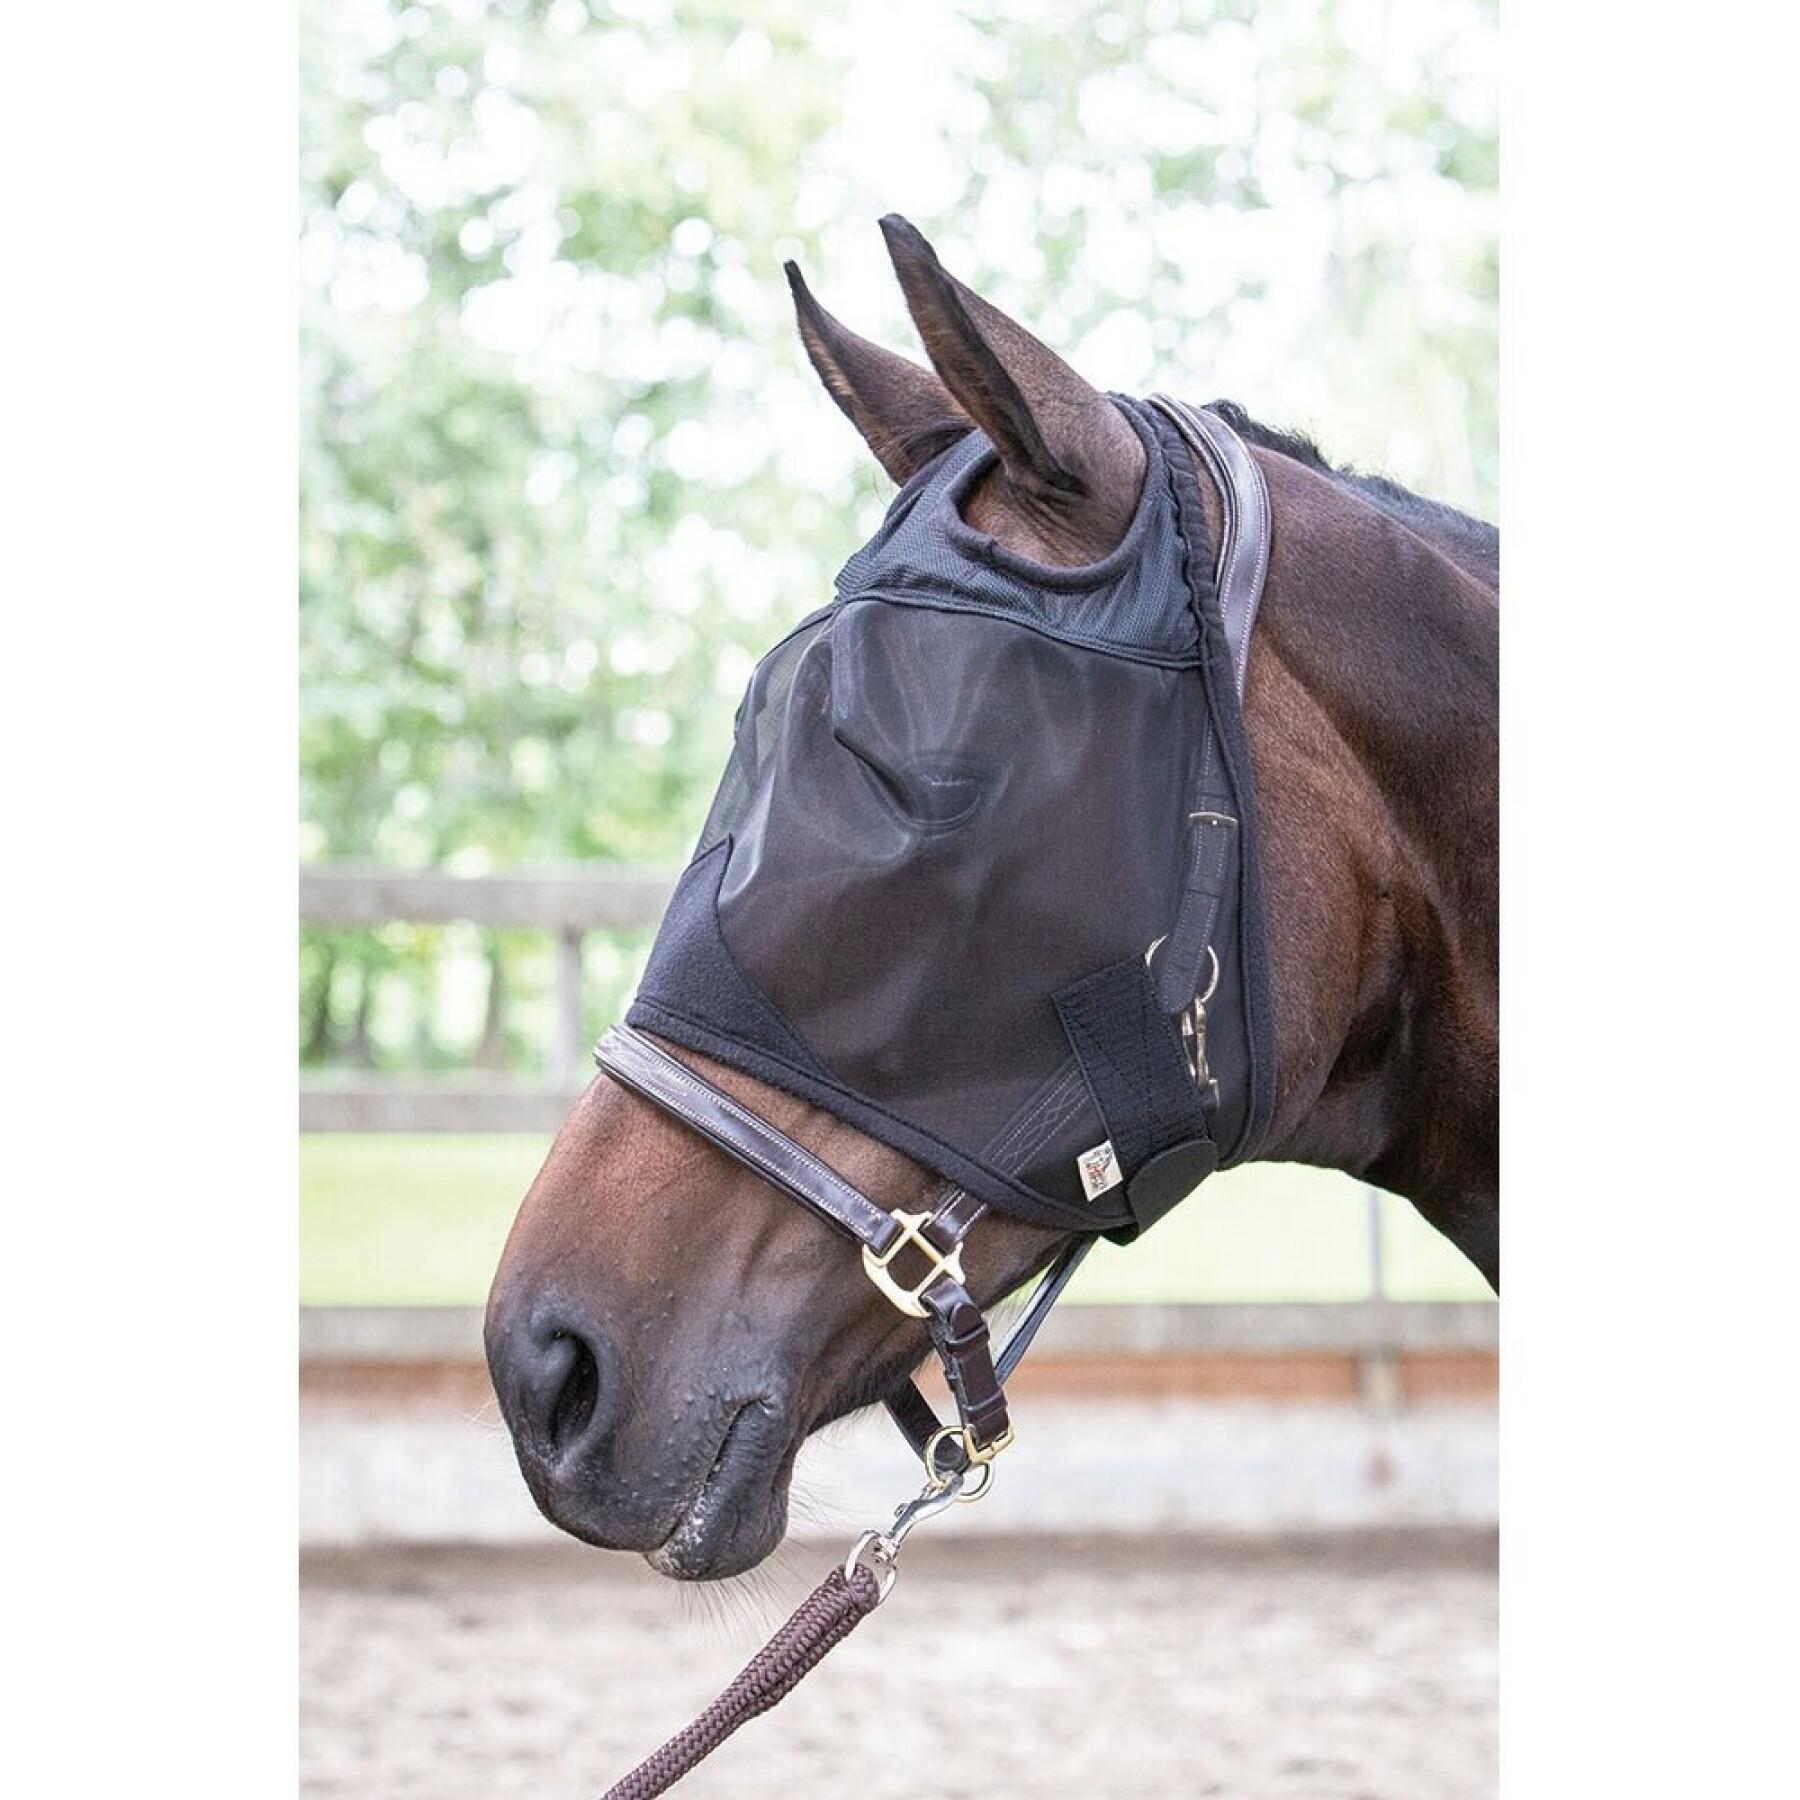 Anti-fly mask without ears for horses Harry's Horse Flyshield